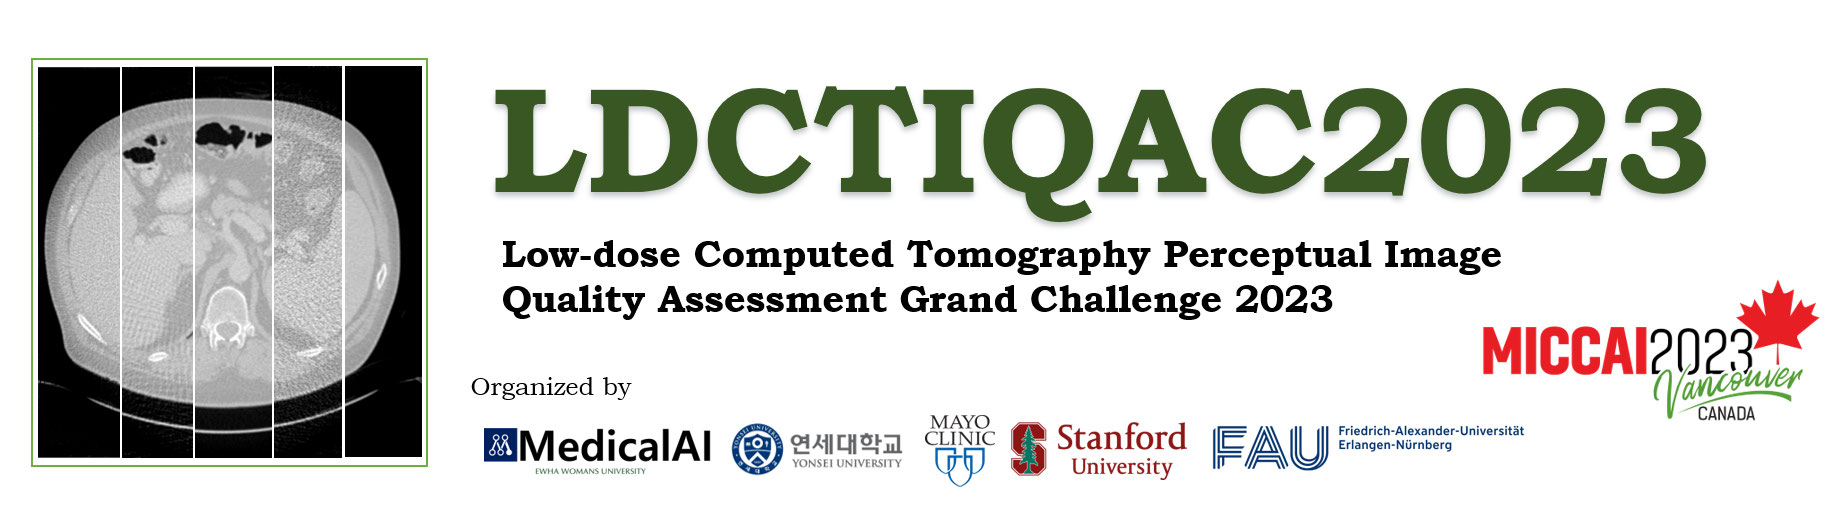 Low-dose Computed Tomography Perceptual Image Quality Assessment Banner